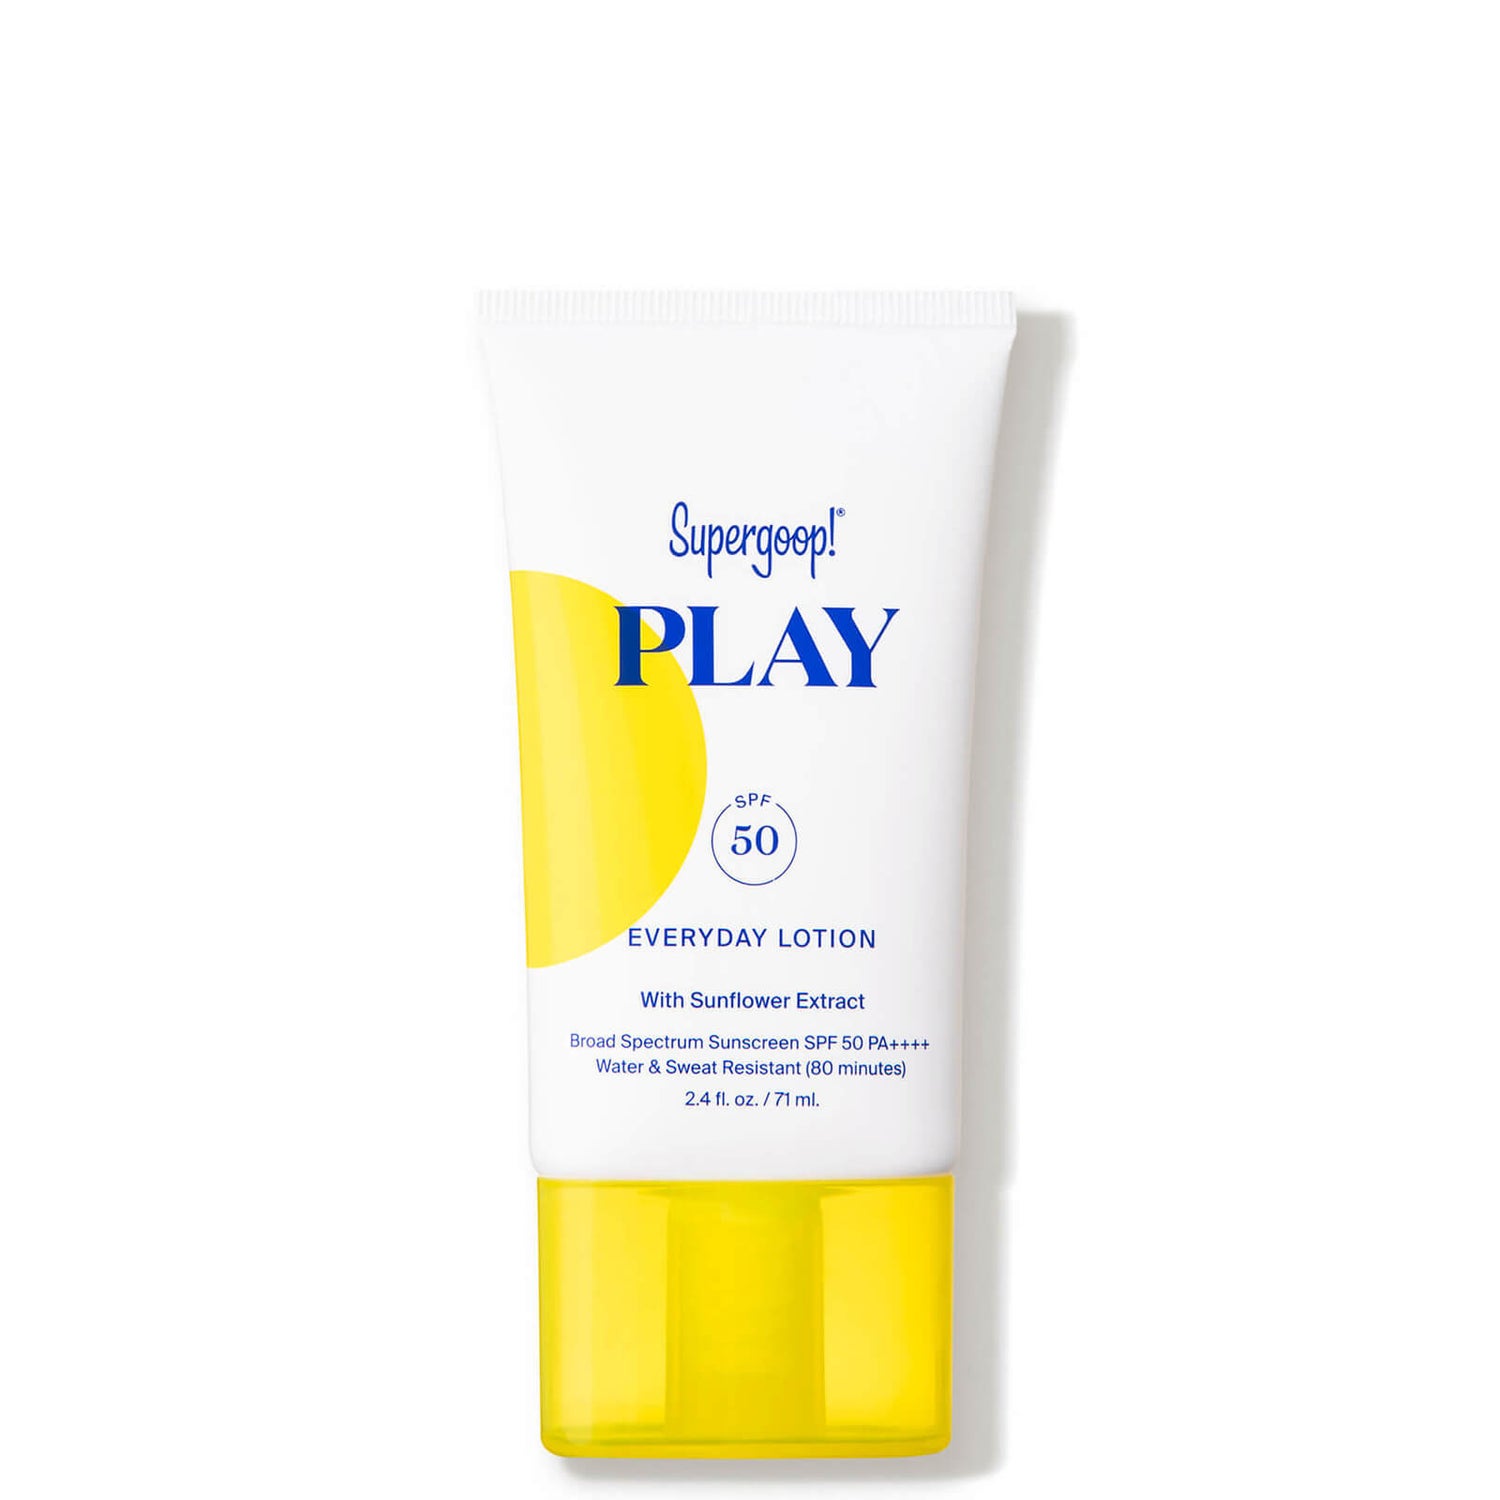 Supergoop!® PLAY Everyday Lotion SPF 50 with Sunflower Extract 2.4 oz. - Dermstore